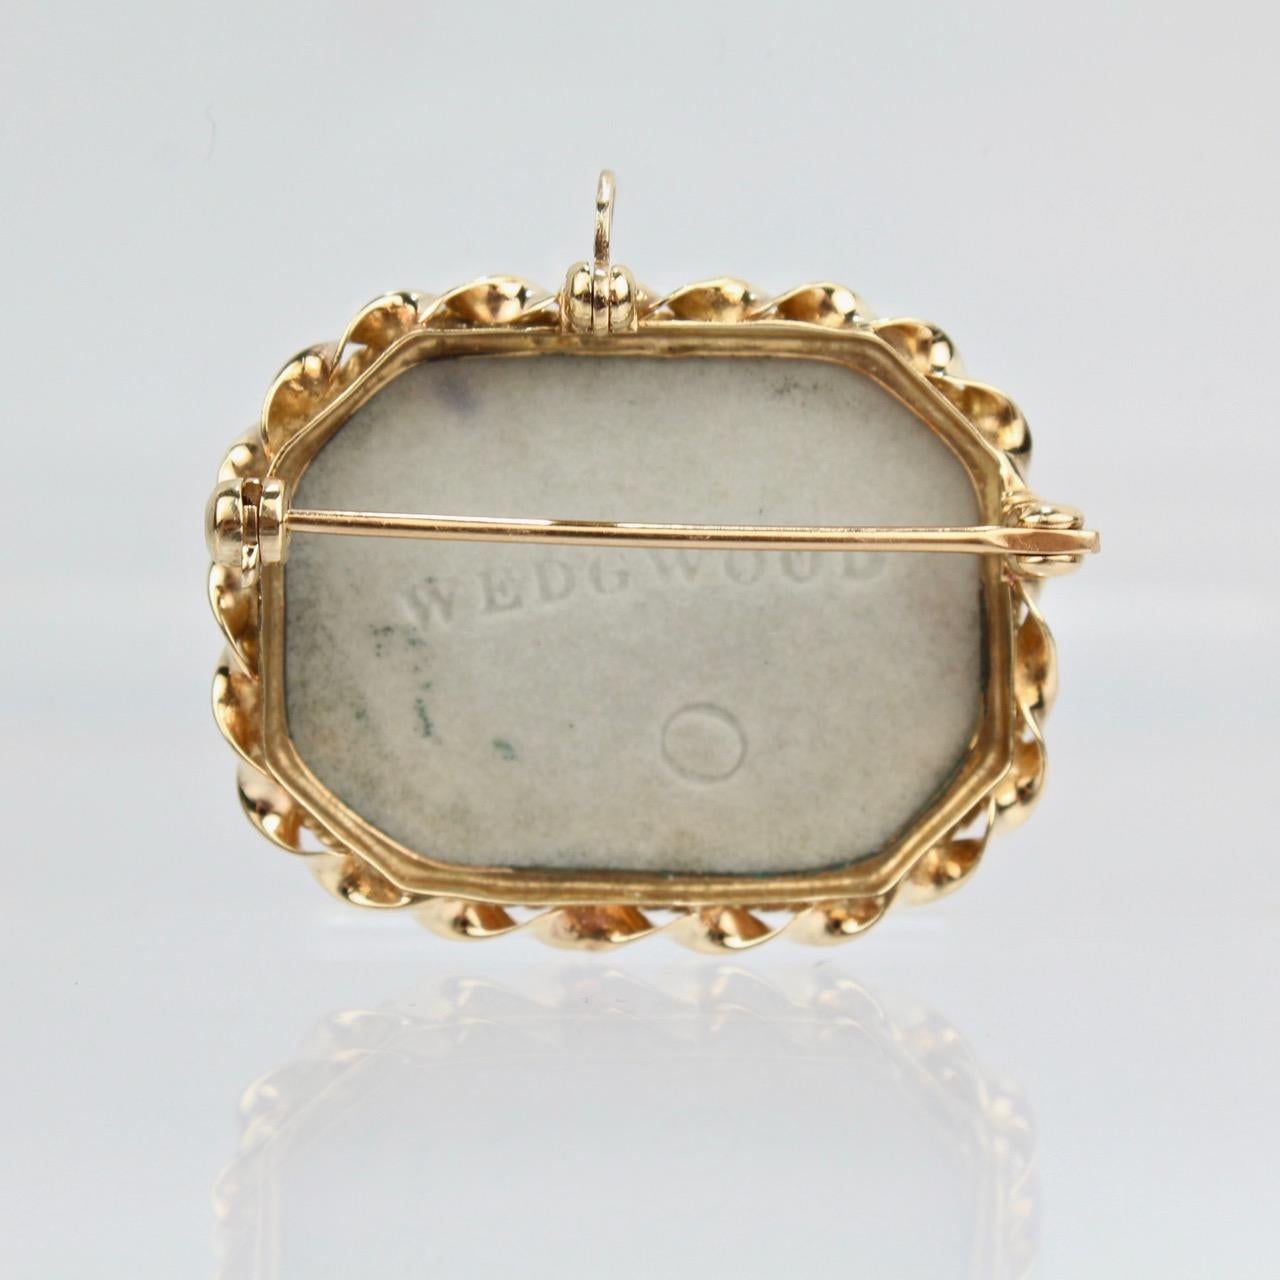 Neoclassical Antique 19th Century Wedgwood Blue Jasper Plaque and 14 Karat Gold Pendant / Pin For Sale